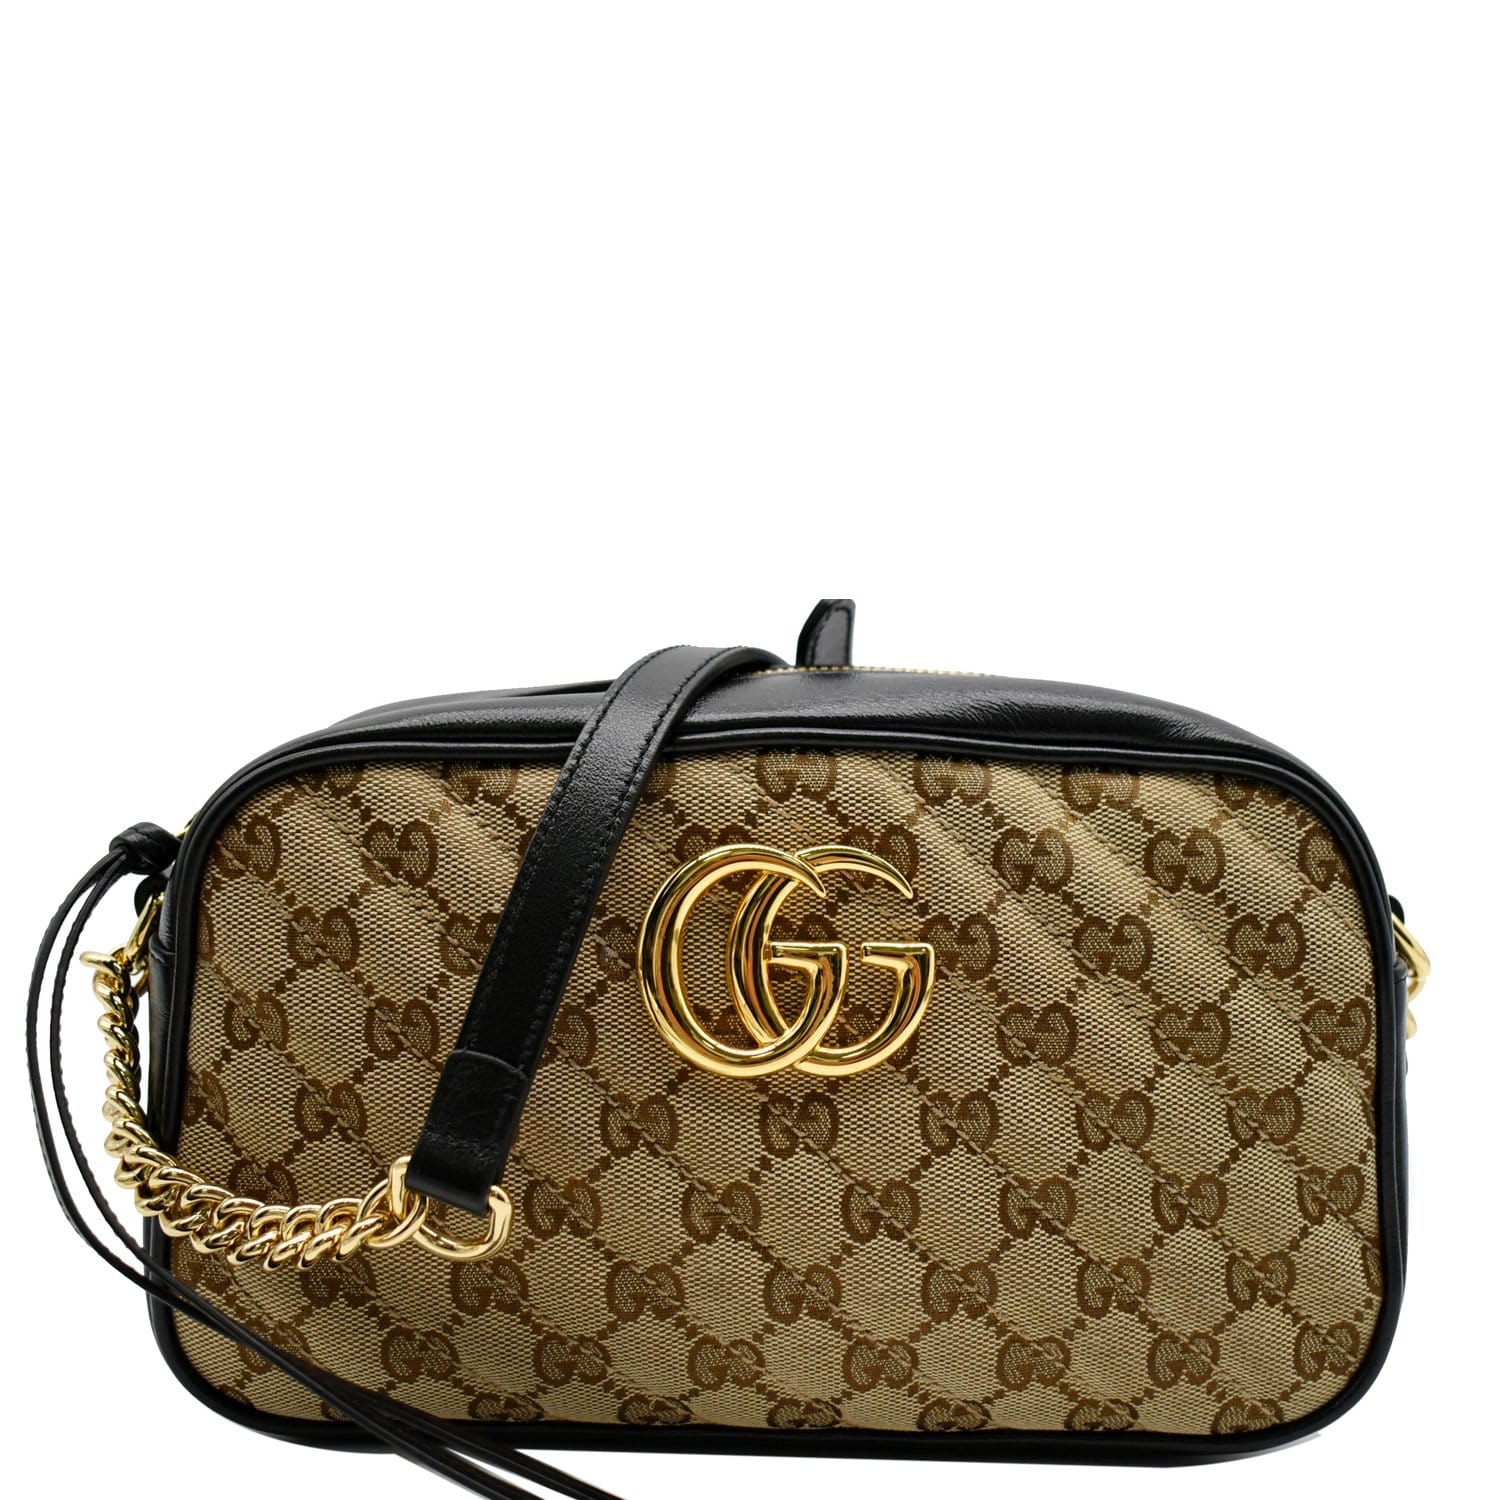 Gucci Pre-owned Women's Fabric Clutch Bag - Beige - One Size